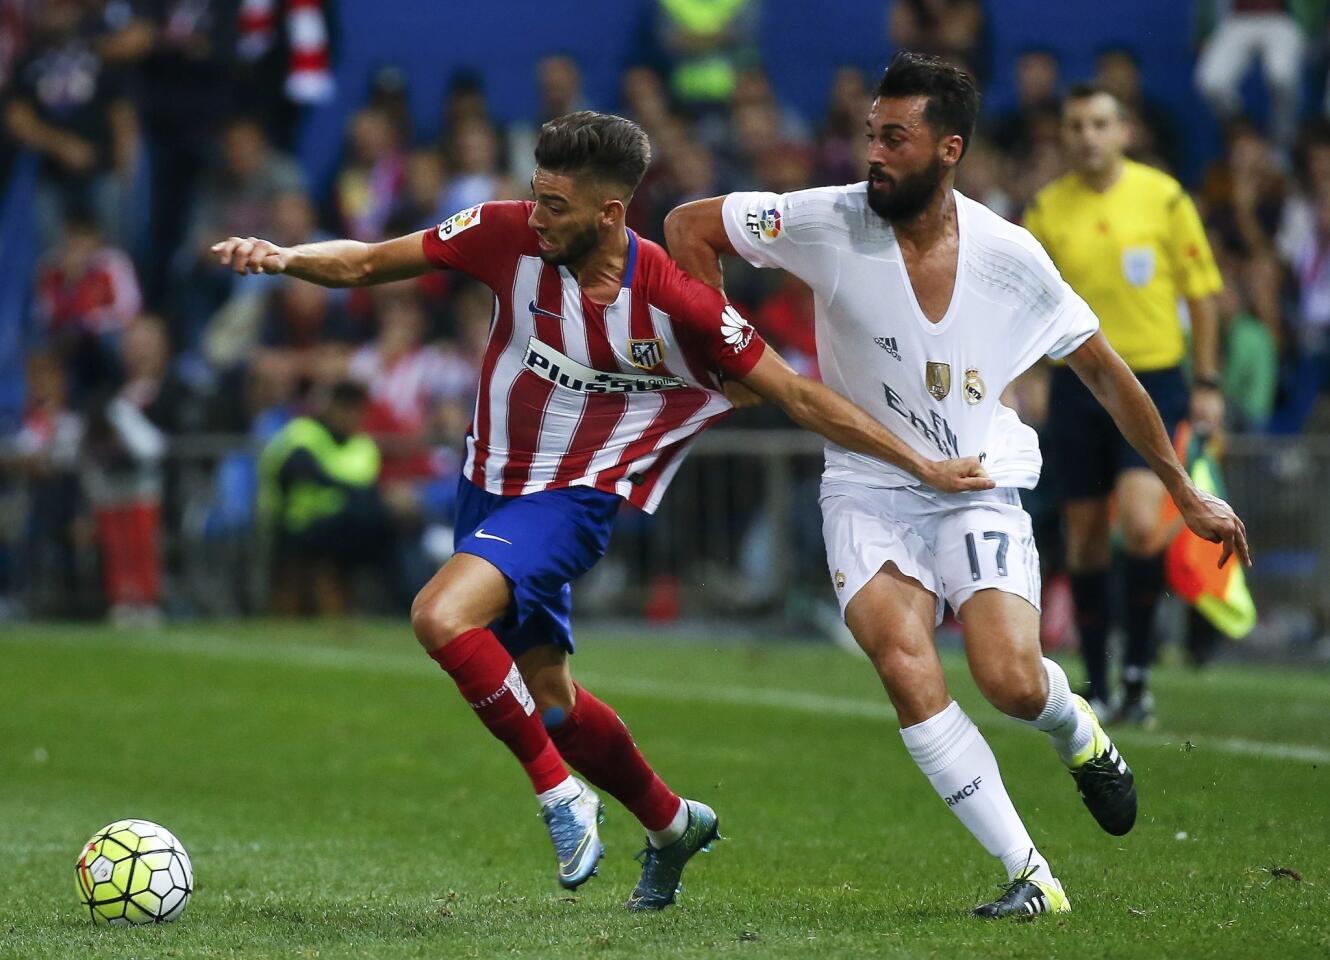 Atletico Madrid's Yannick Carrasco is challenged by Real Madrid's Alvaro Arbeloa during their Spanish first division derby soccer match in Madrid